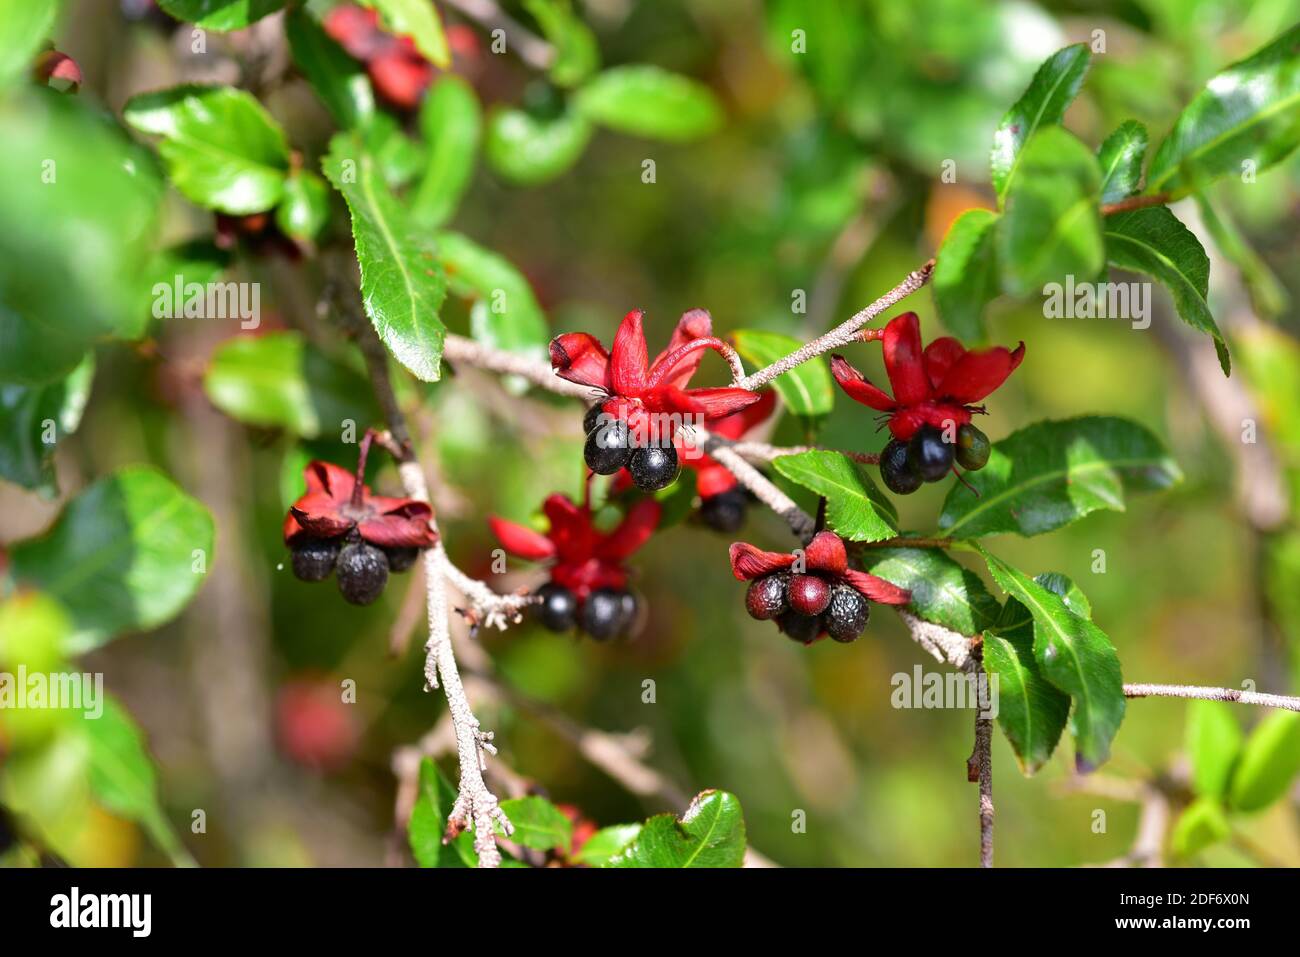 Carnival bush or Mickey Mouse bush (Ochna serrulata) is a shrub native to South Africa. Flowers and leaves detail. Stock Photo